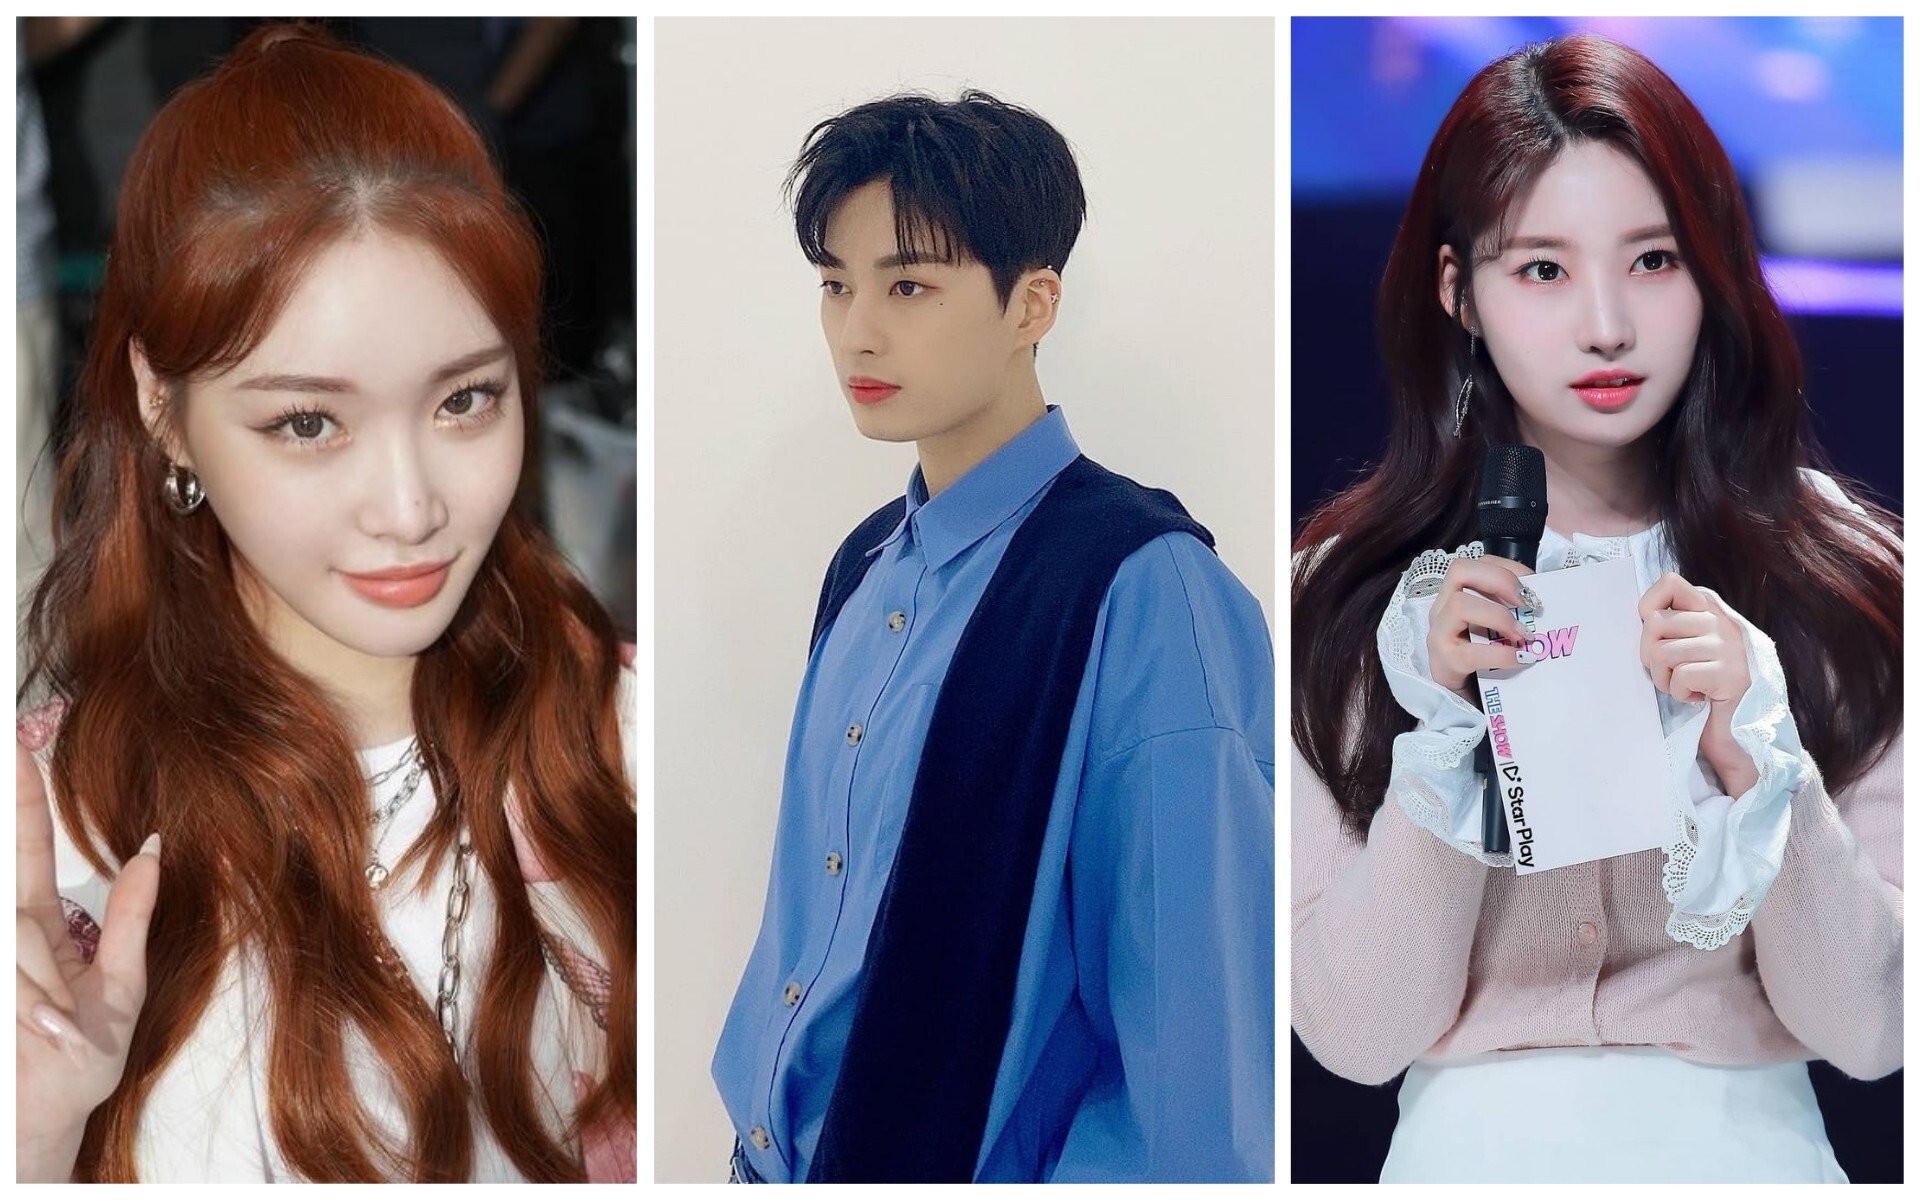 K-pop stars Chungha, Kogyeol from Up10tion and Sihyeon from Everglow have all tested positive for Covid-19. Photos: @chungha_official; @u10t_kogyeol; @syeonstagram99/Instagram